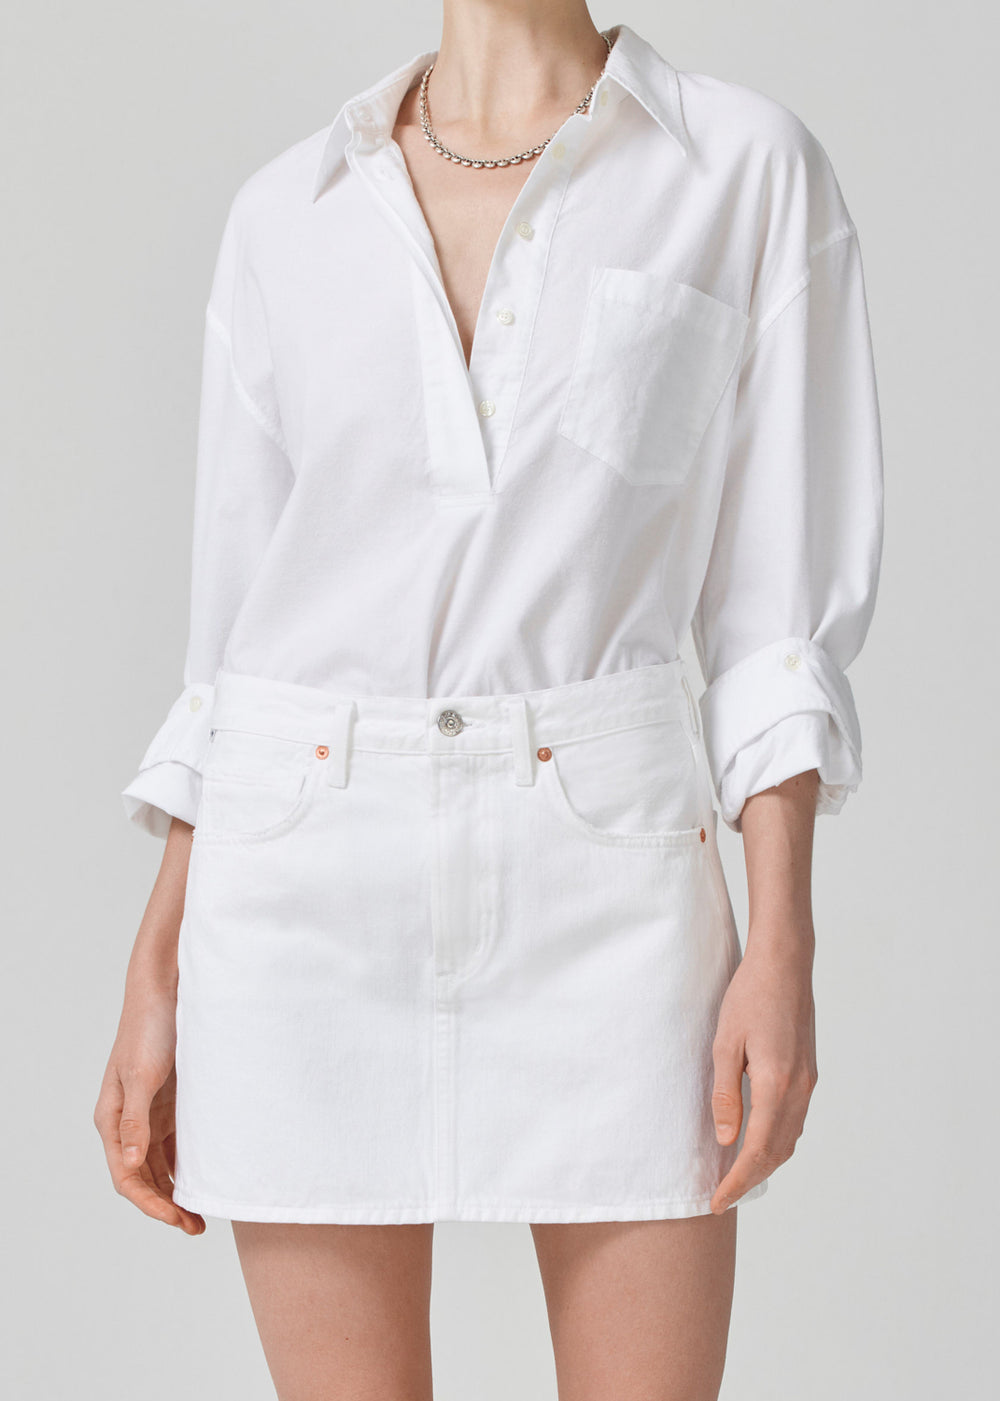 Aave Oversized Cuff Shirt - Oxford White